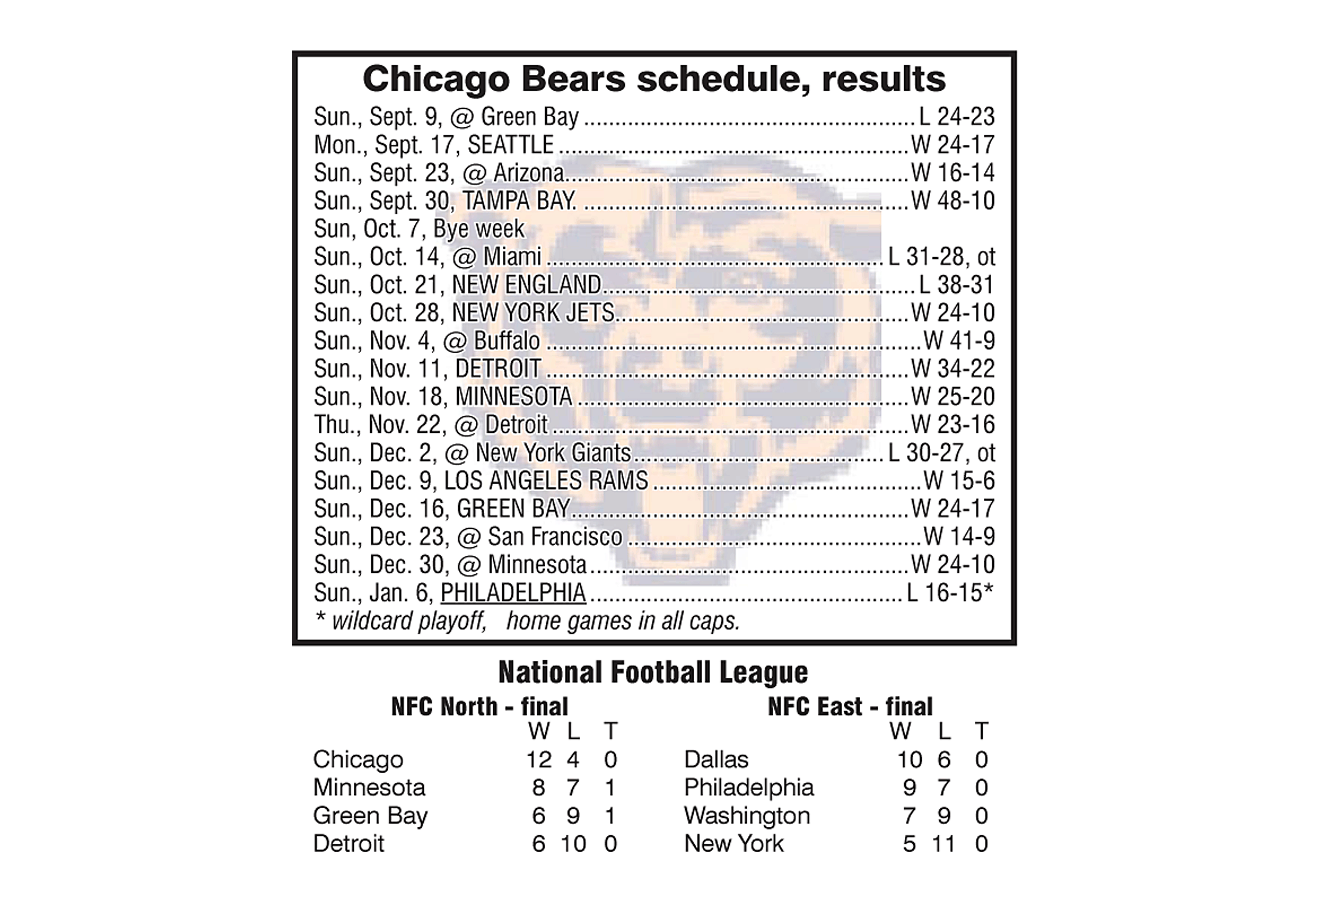 Chicago Bears 2018 schedule and results through January 6, 2019 The Voice